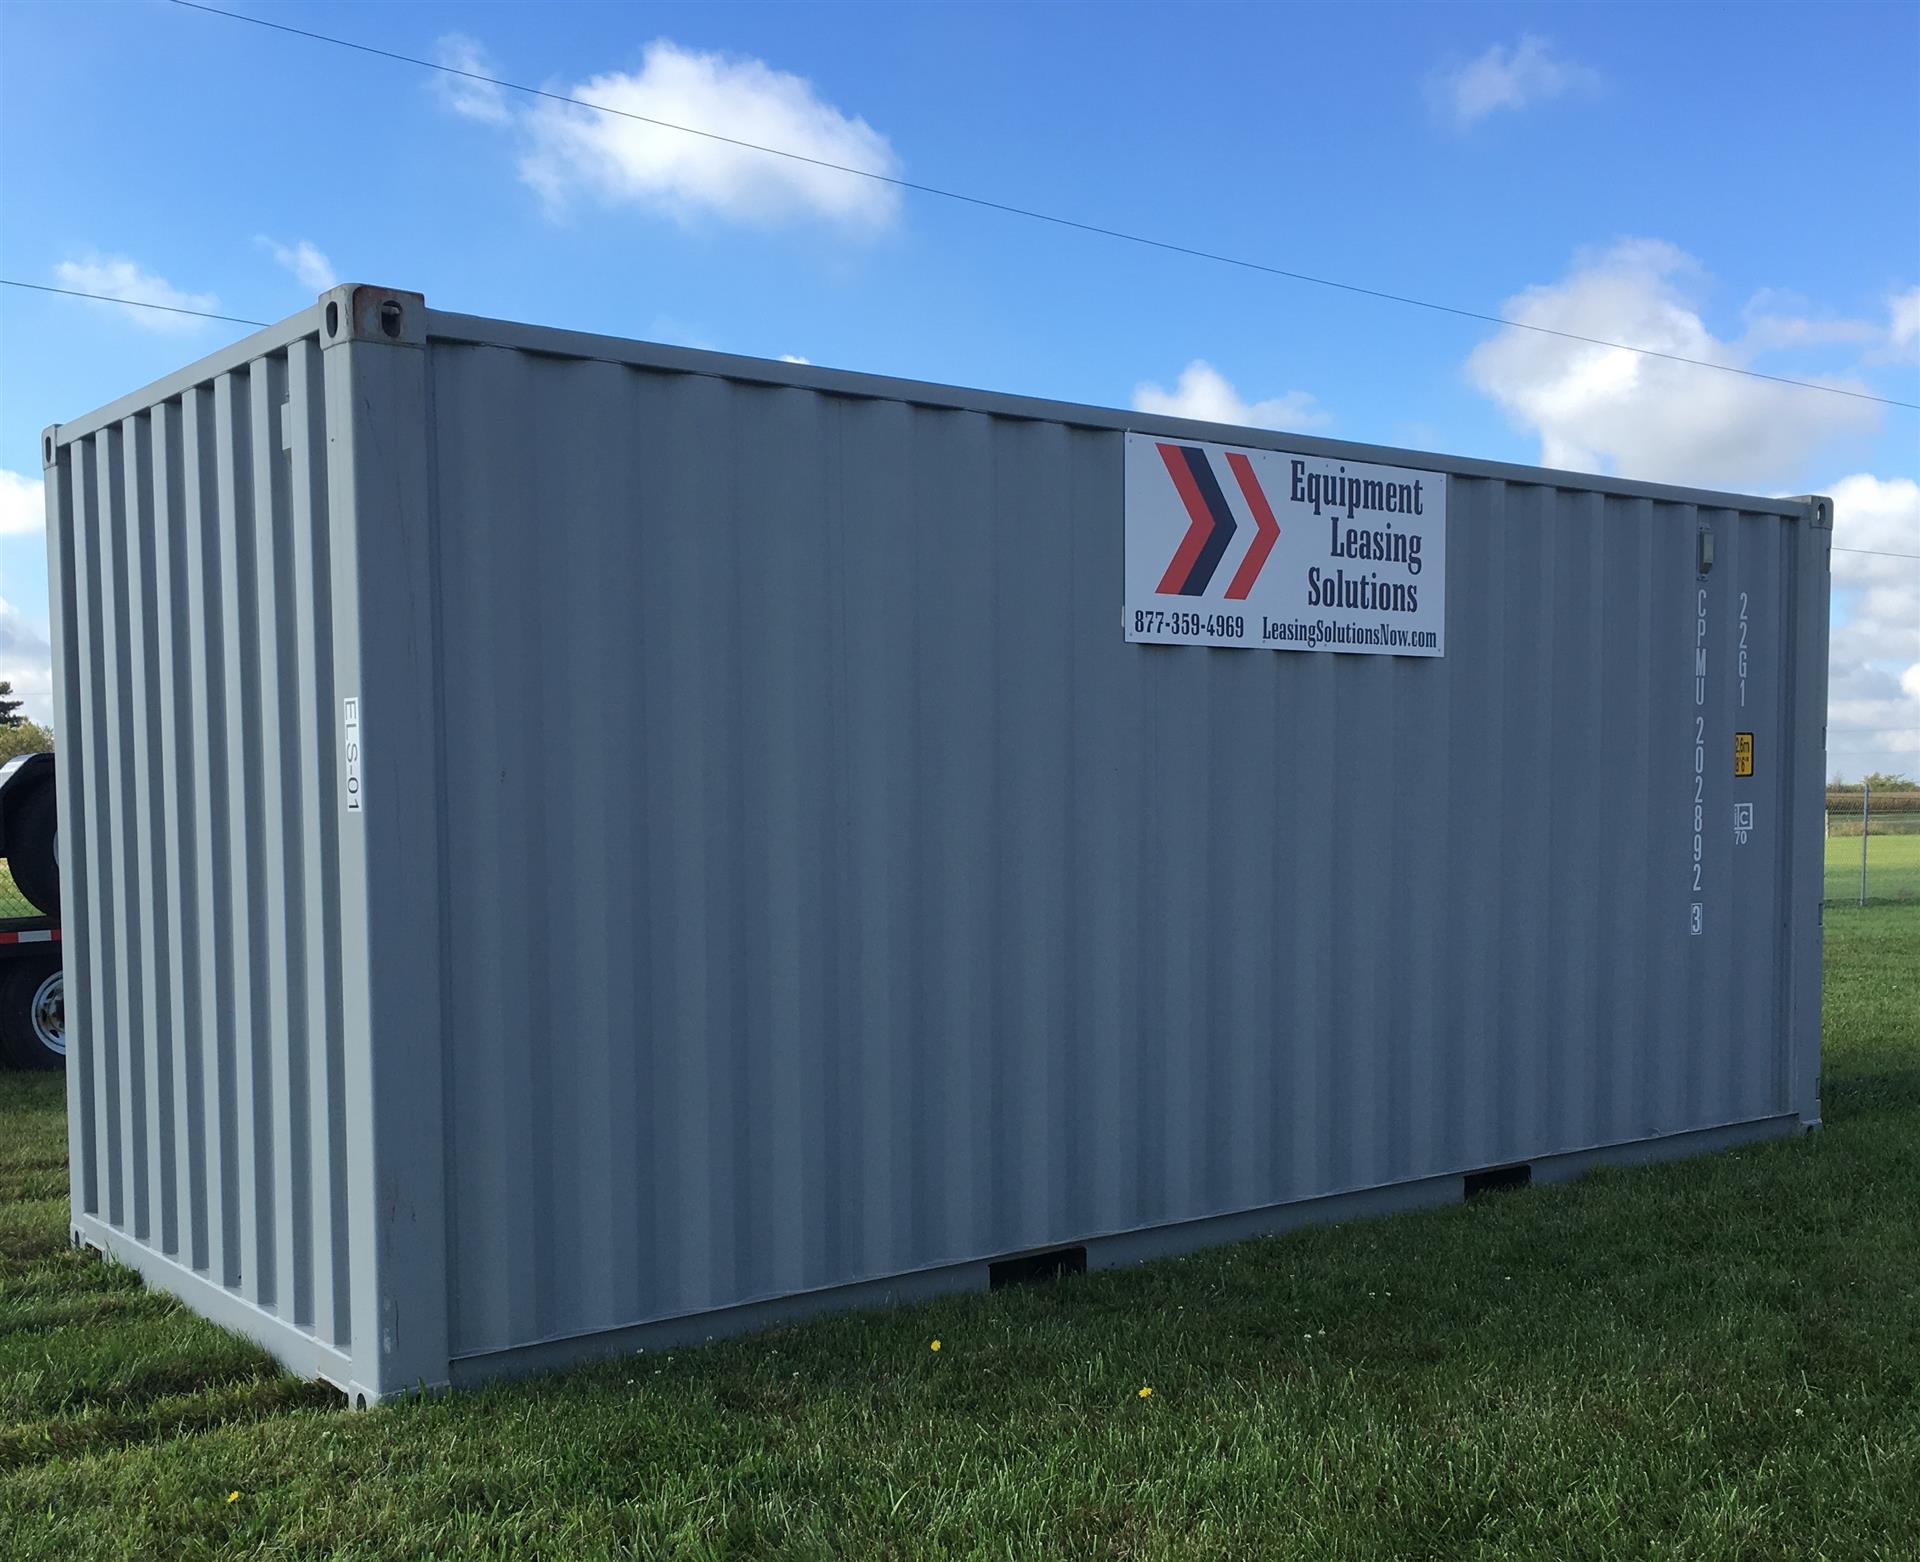 2017 Equipment Leasing Solutions- 20' Container